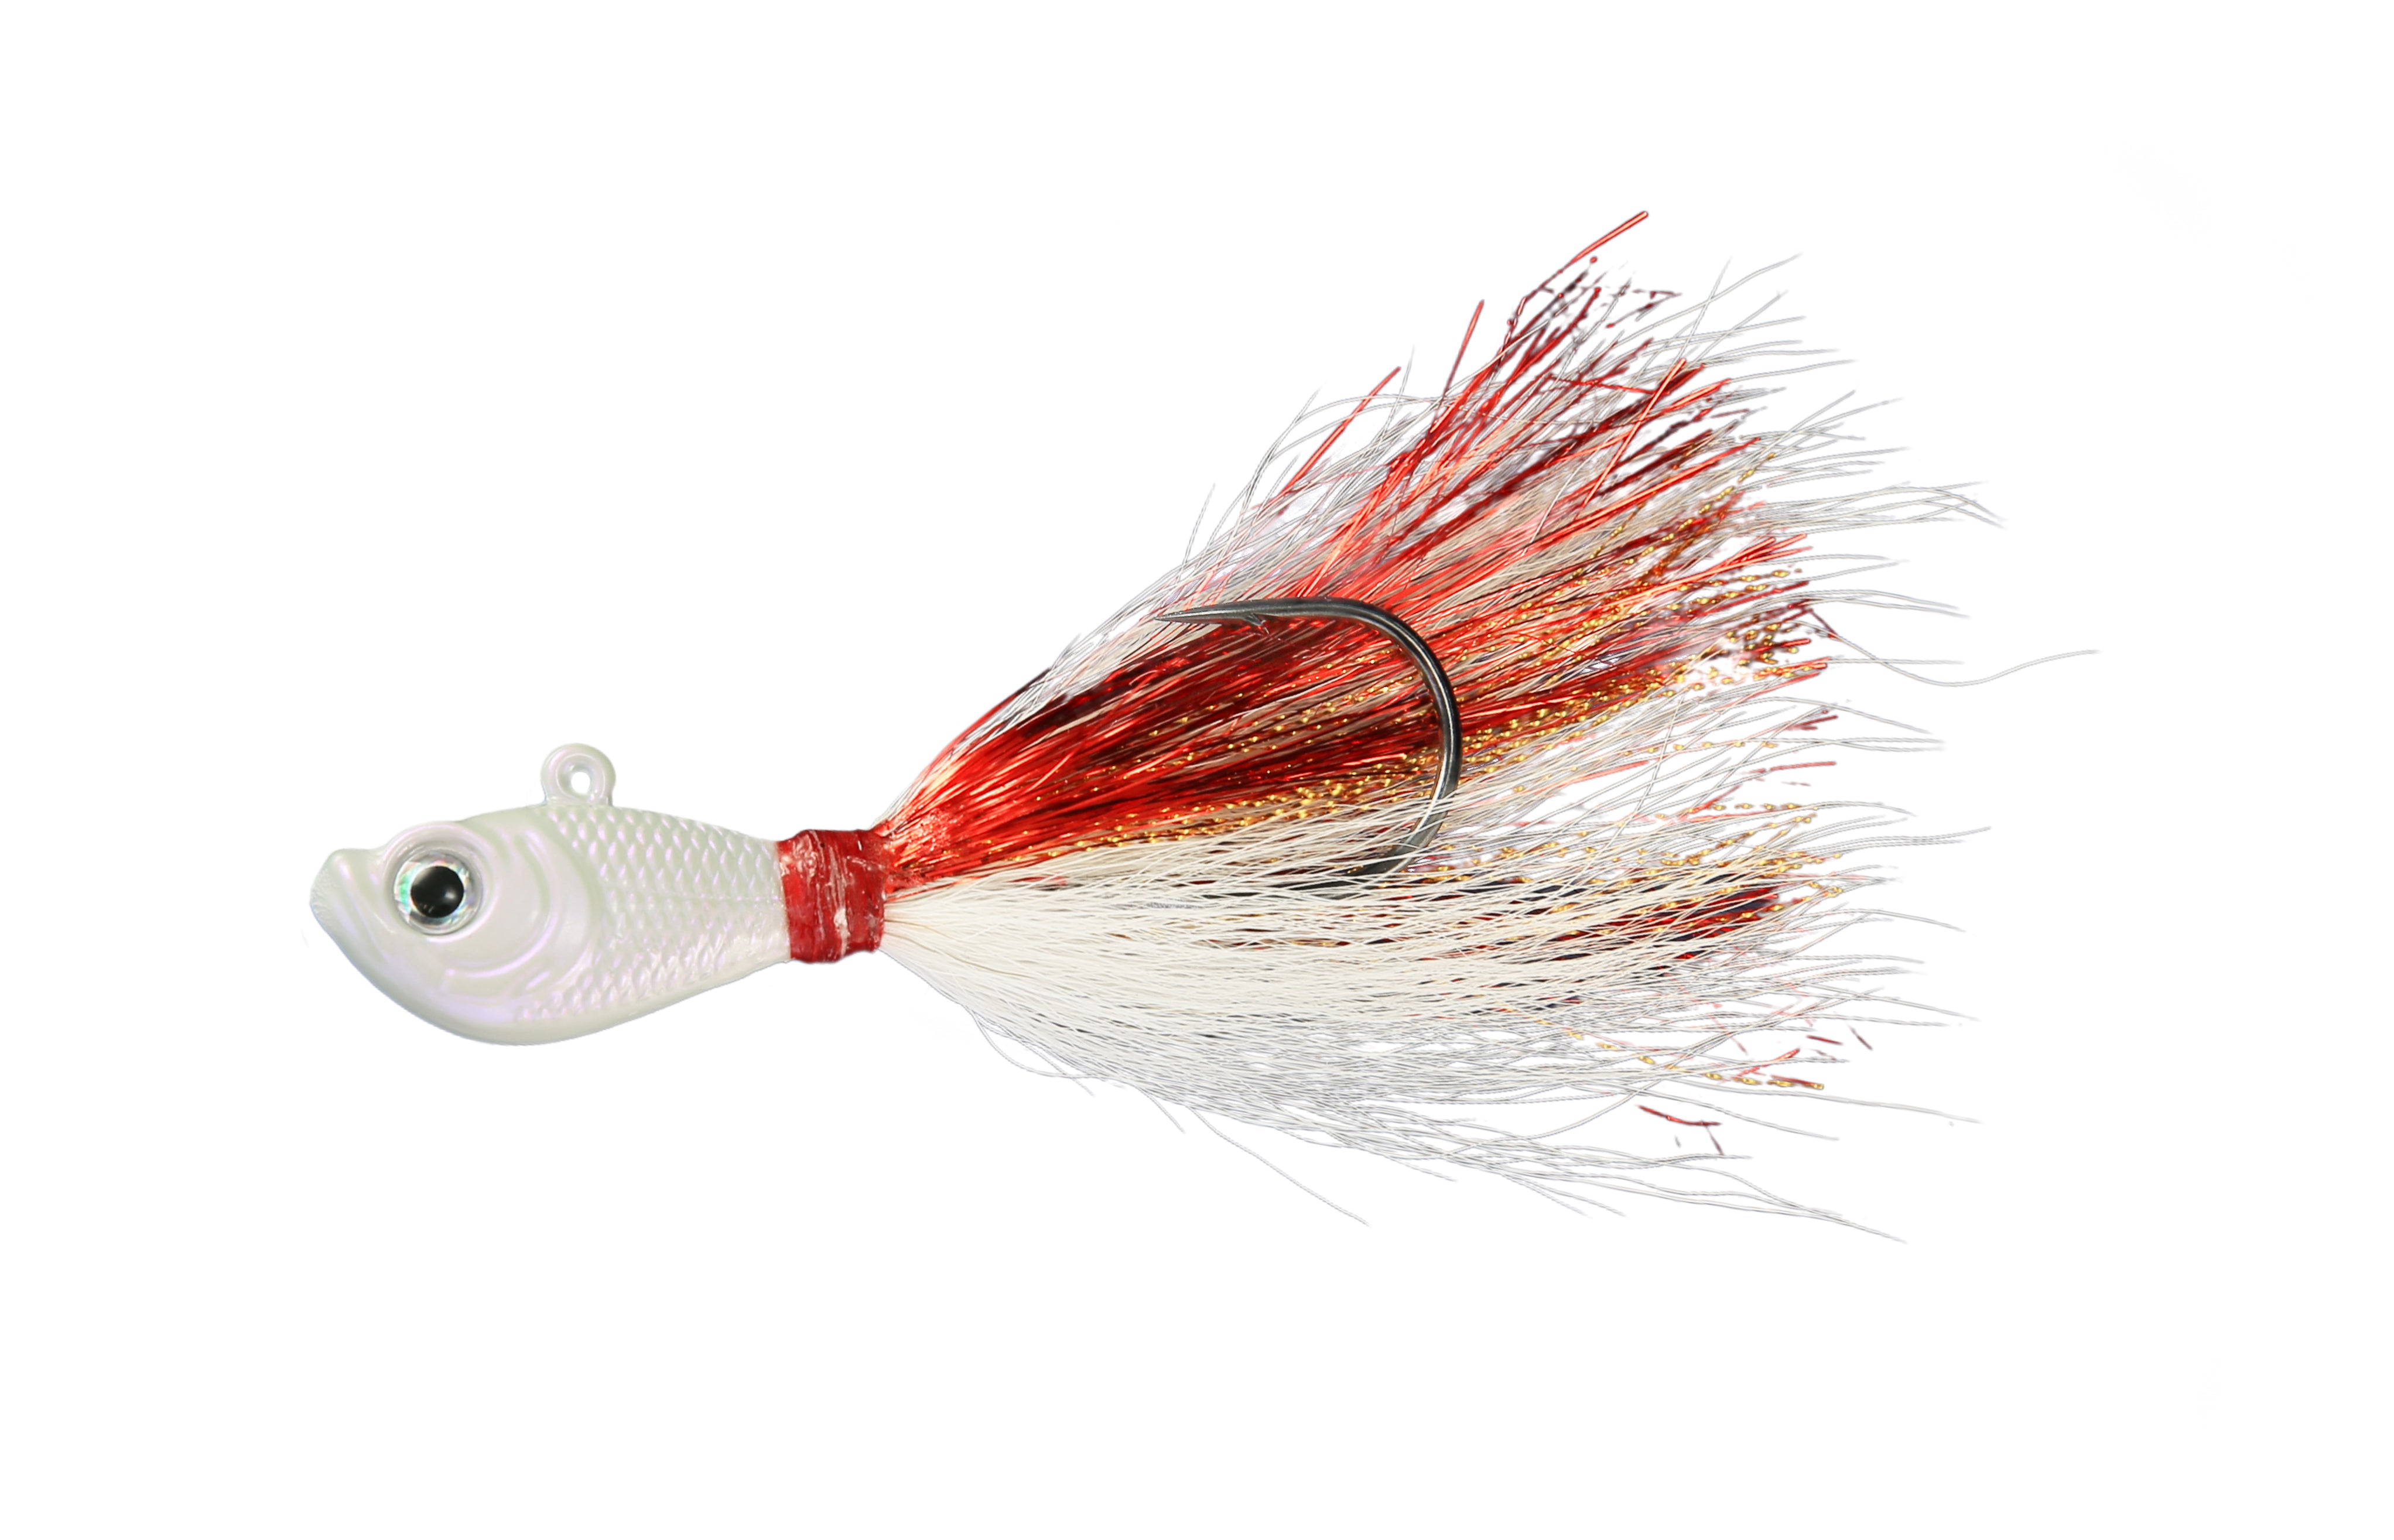 SPRO Bucktail Jig 1/4,1/2, 3/4, 1, 1.5, 2, & 3 oz. Fishing Choose Size &  Color